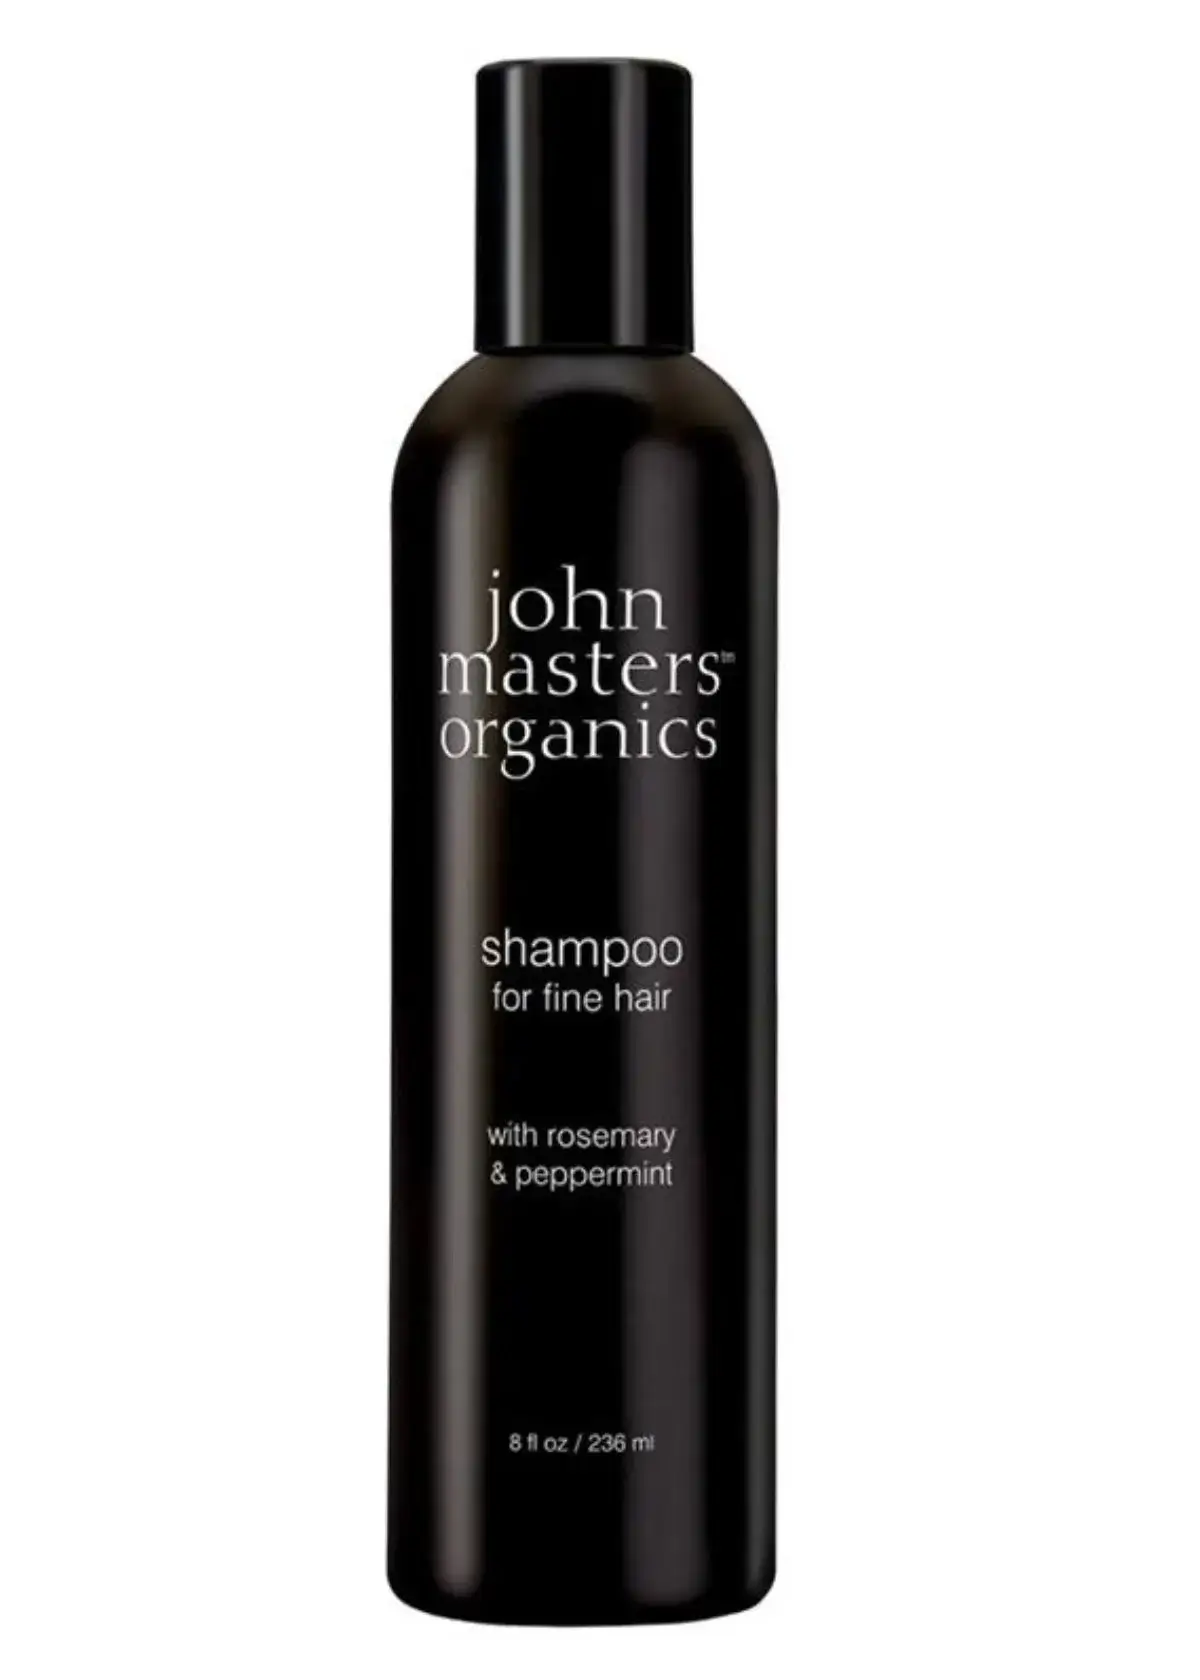 how to use dry shampoo for fine hair?